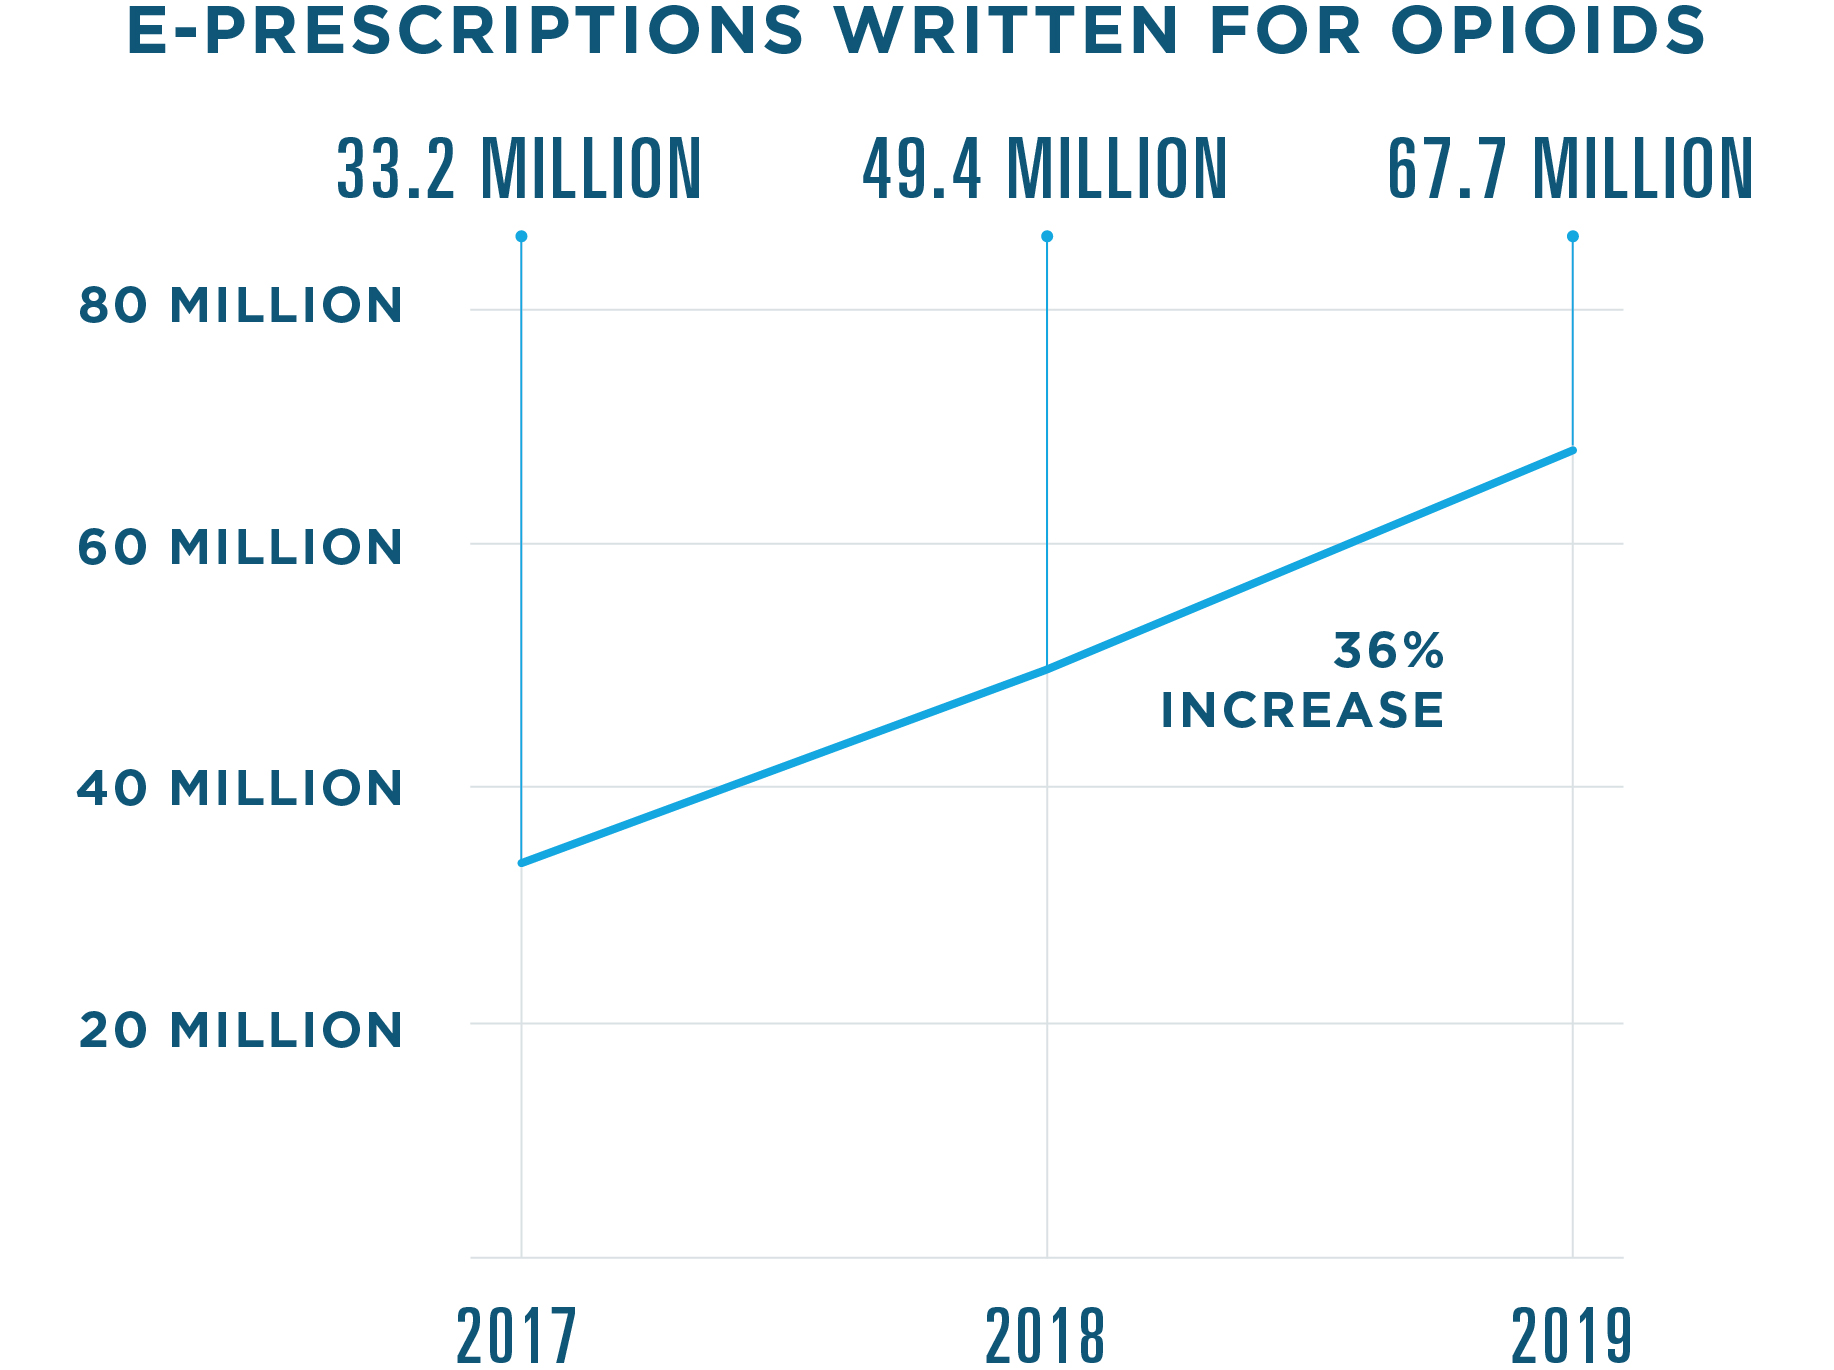 67.7 million e-prescriptions were written for opioids in 2019, a 36% increase from 2018, when they totaled 49.4 million. In 2017, they totaled 33.2 million.